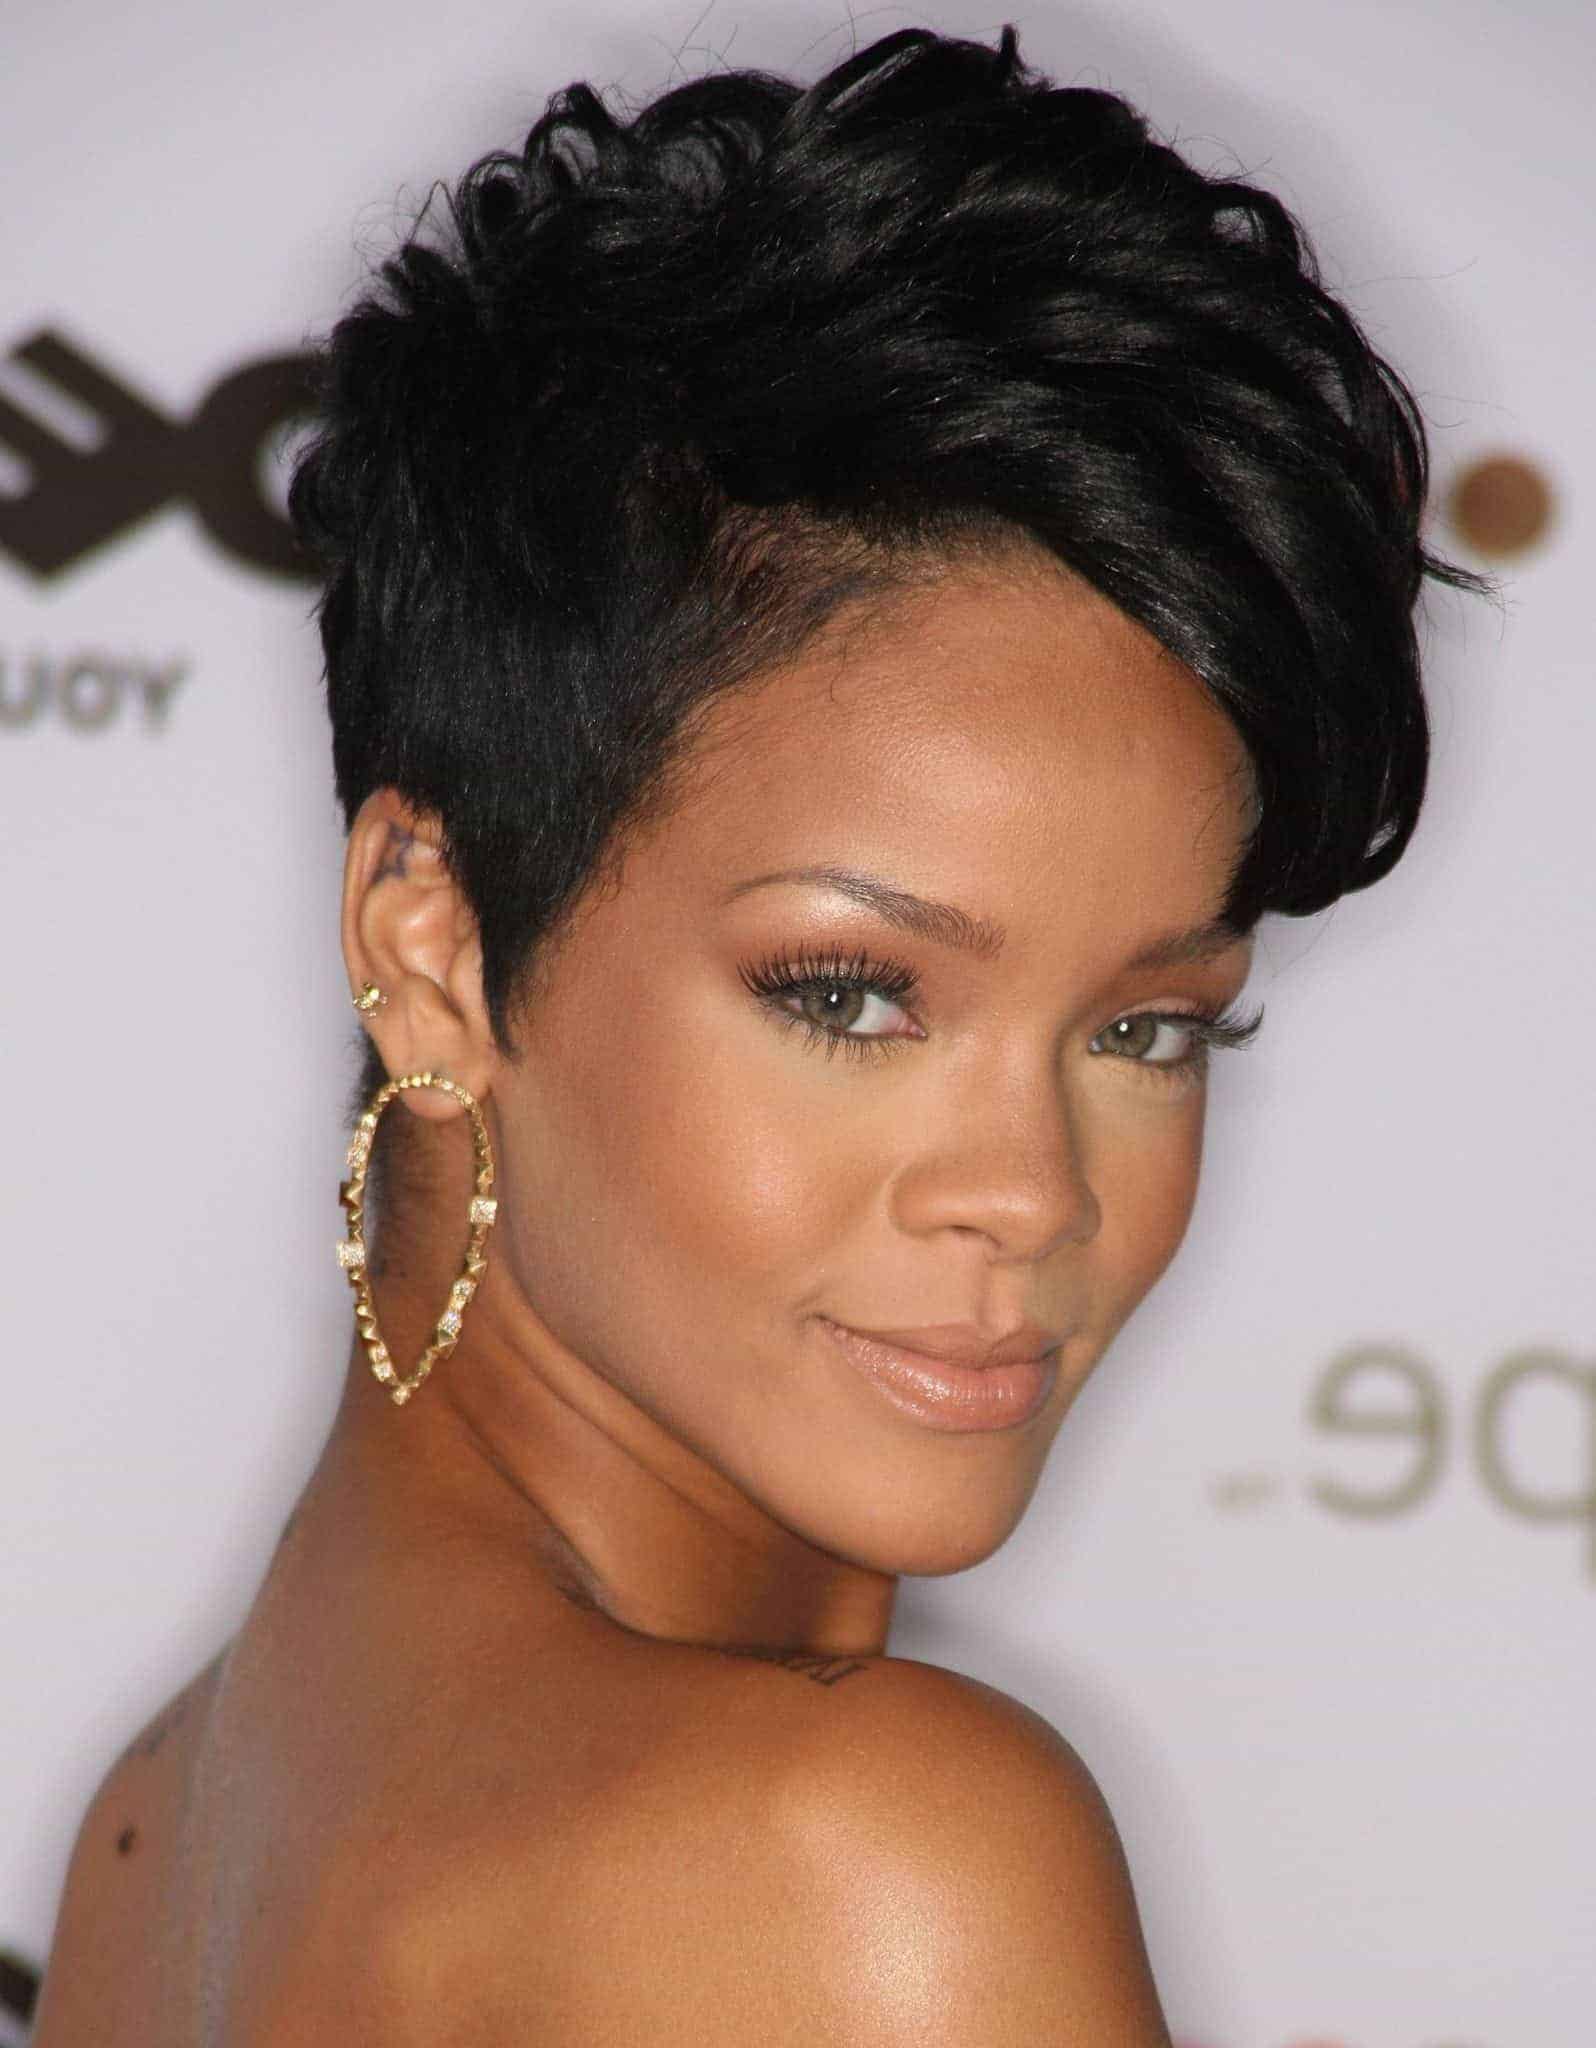 Revamp Your Look with Hair Styles for Short Hair Black Women